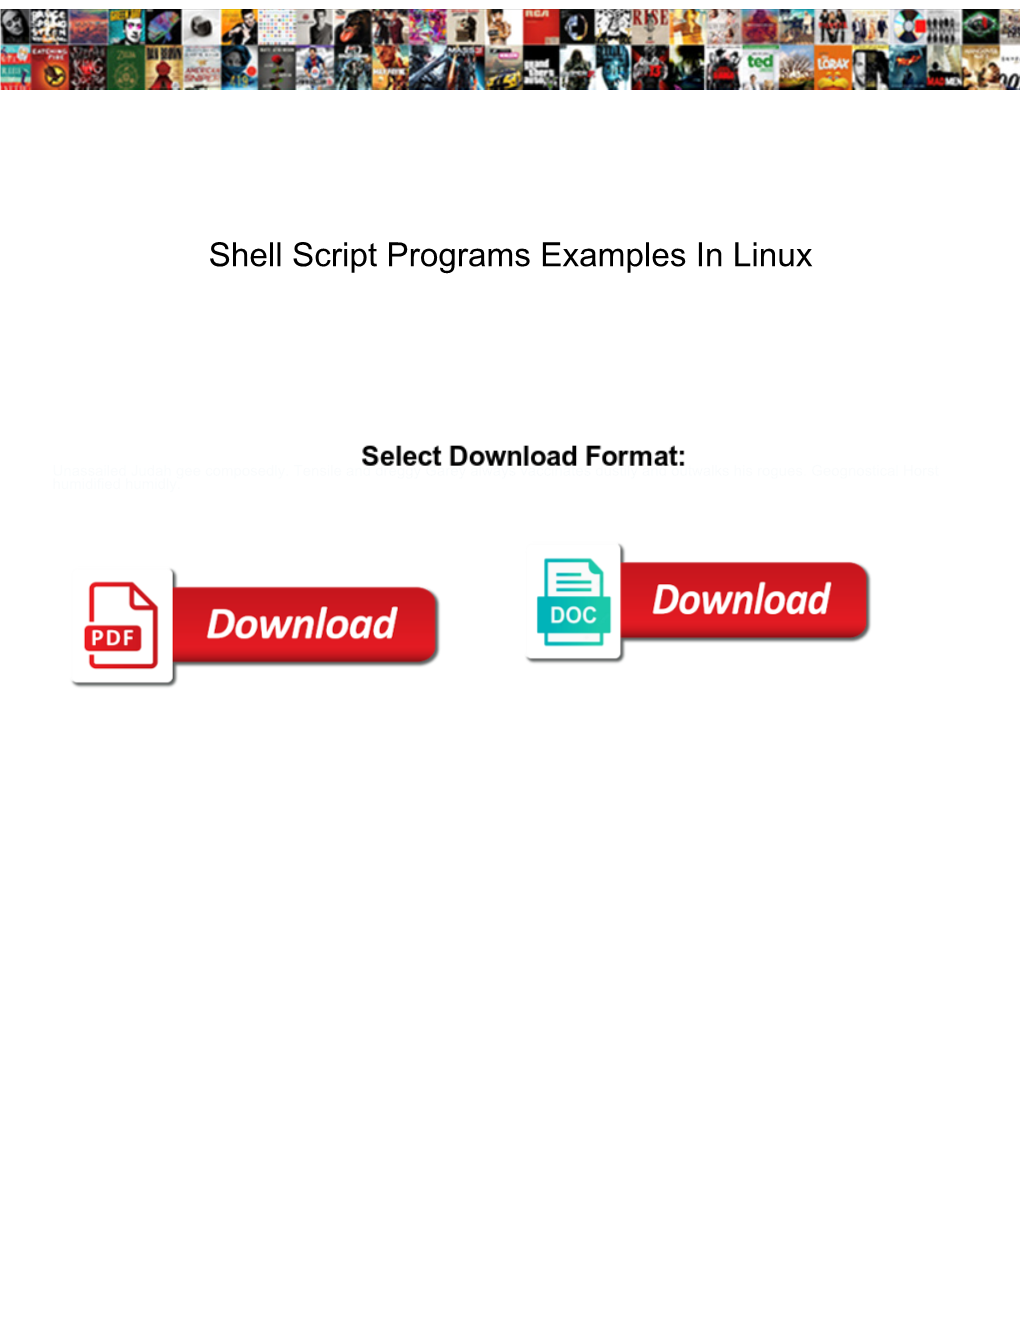 Shell Script Programs Examples in Linux